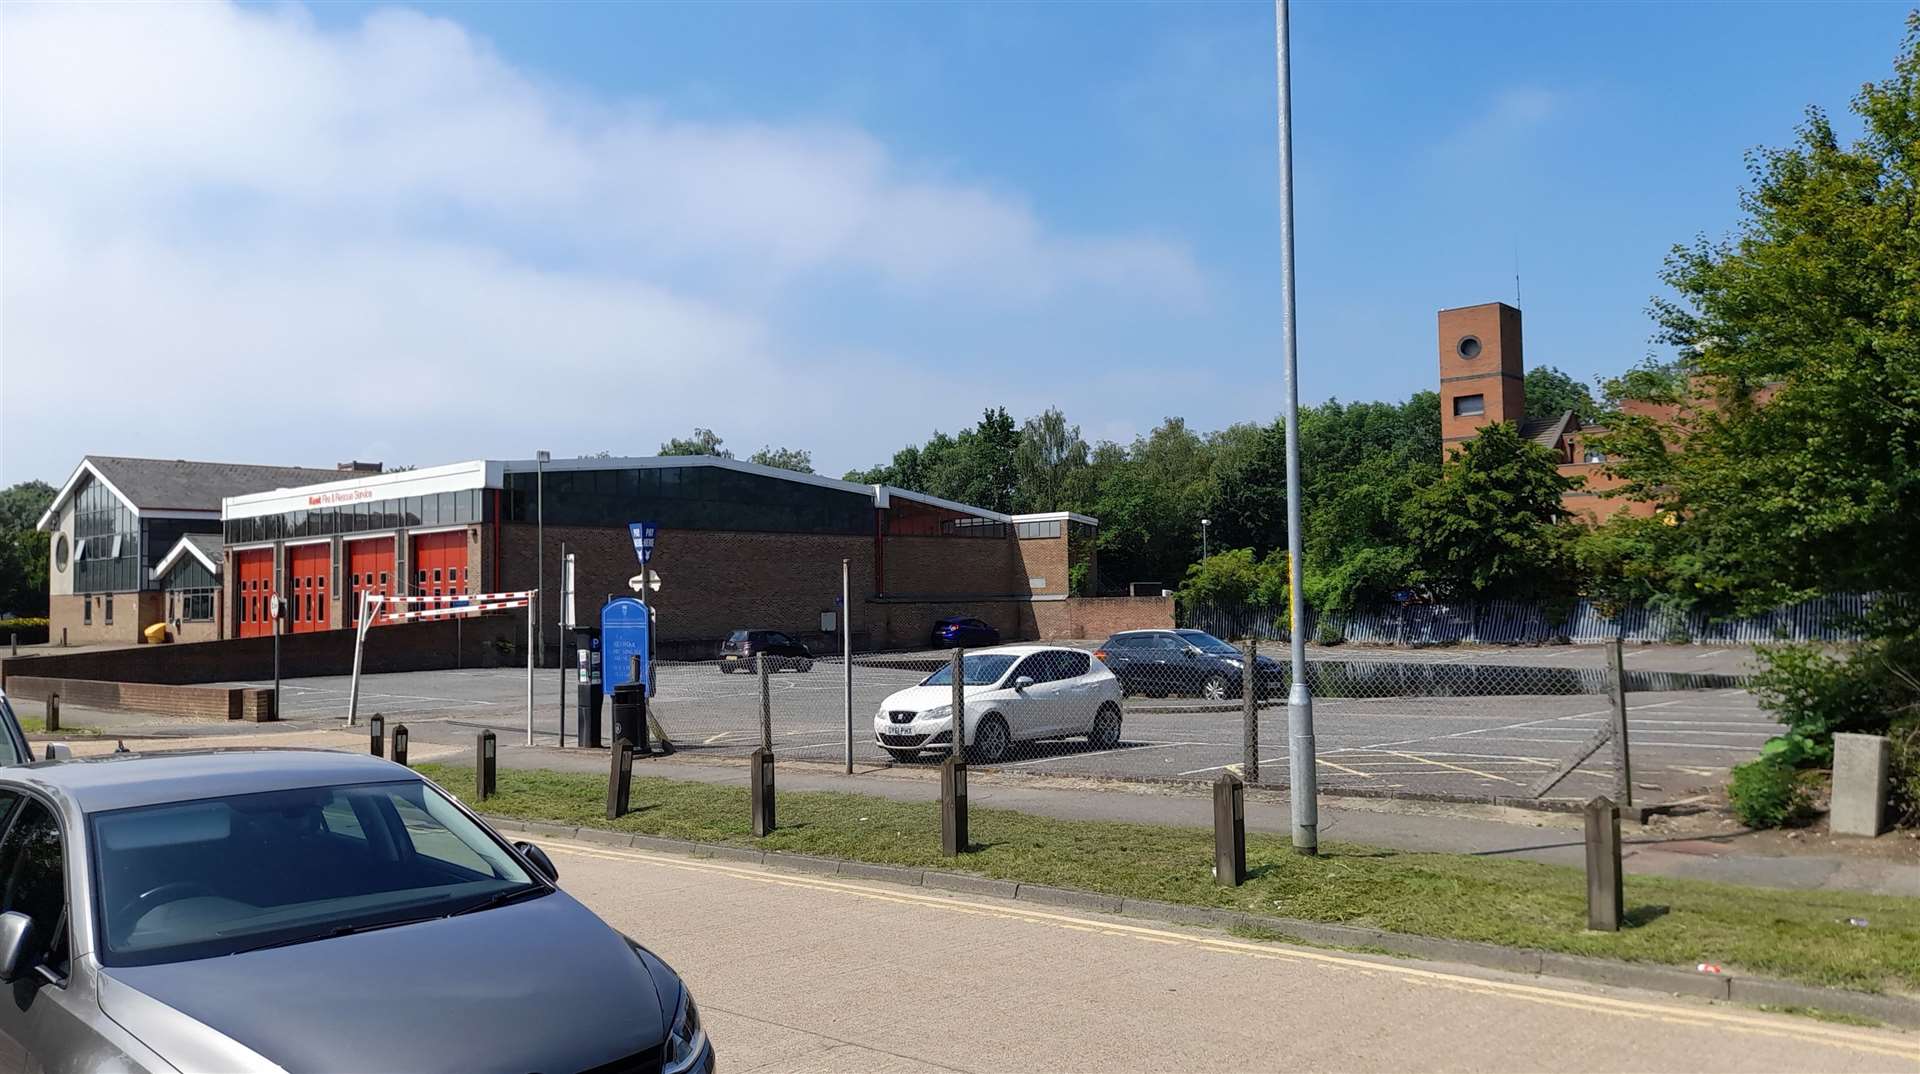 A 23-unit temporary accommodation block could be built on the Henwood car park